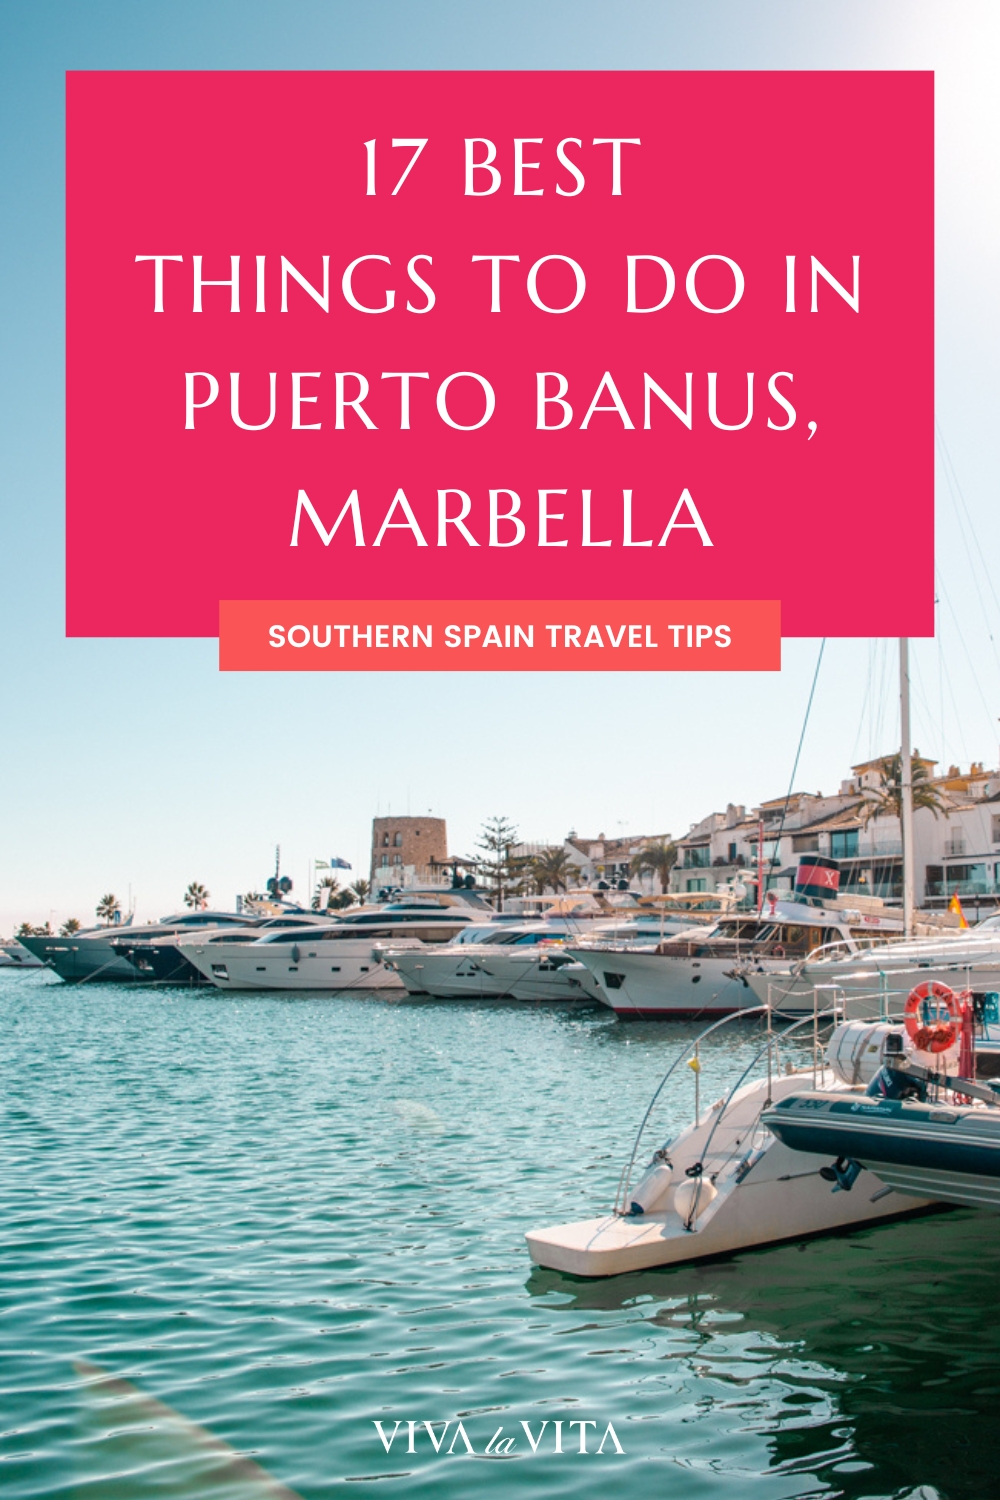 pin image for an article about best things to do in puerto banus, marbella